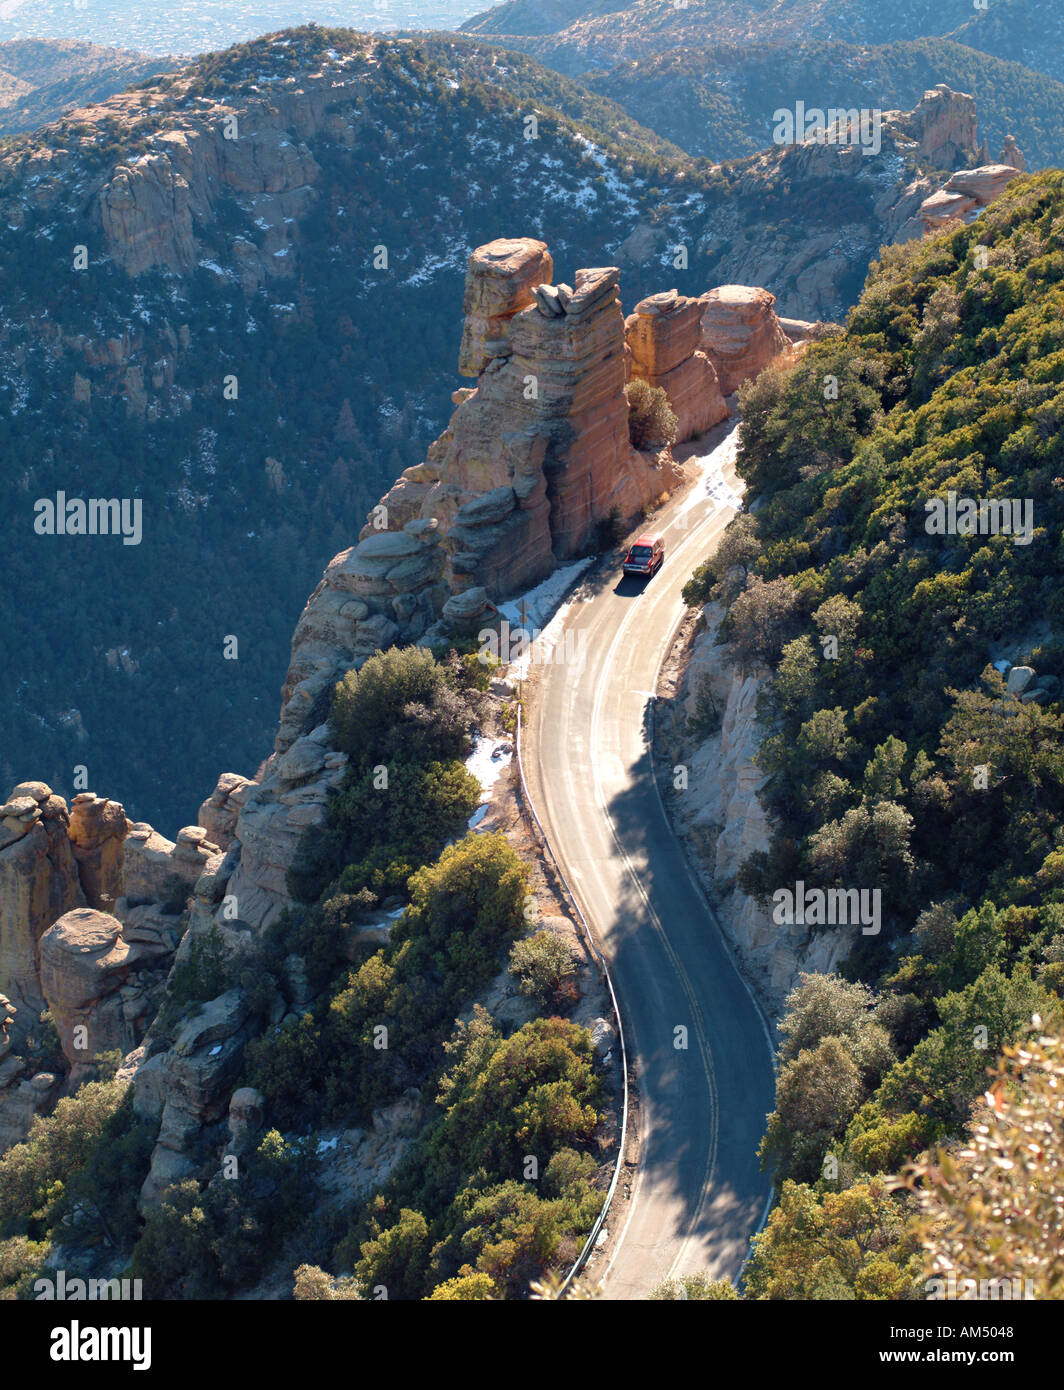 twisting mountain road with a car going around a switch back turn. Stock Photo